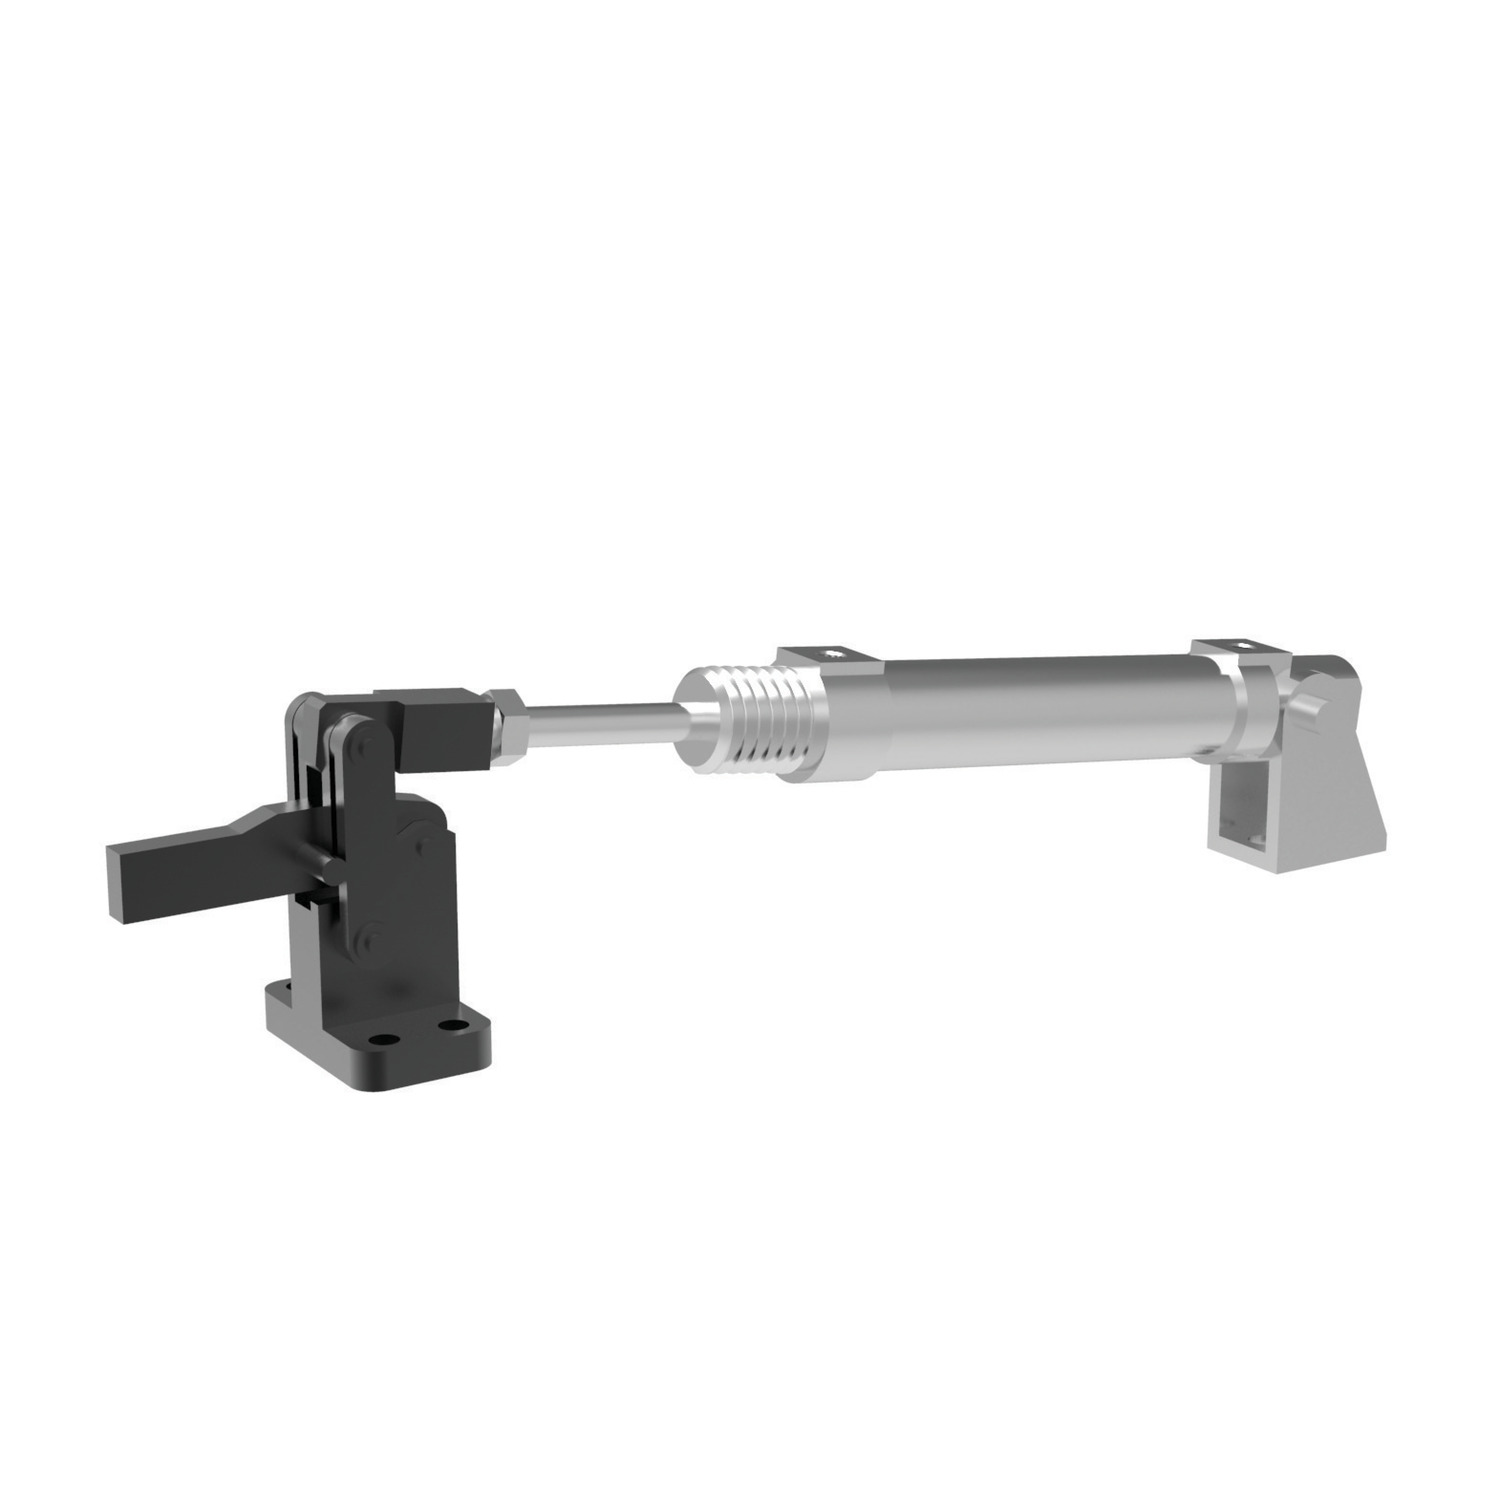 47480 Pneumatic Toggle Clamps